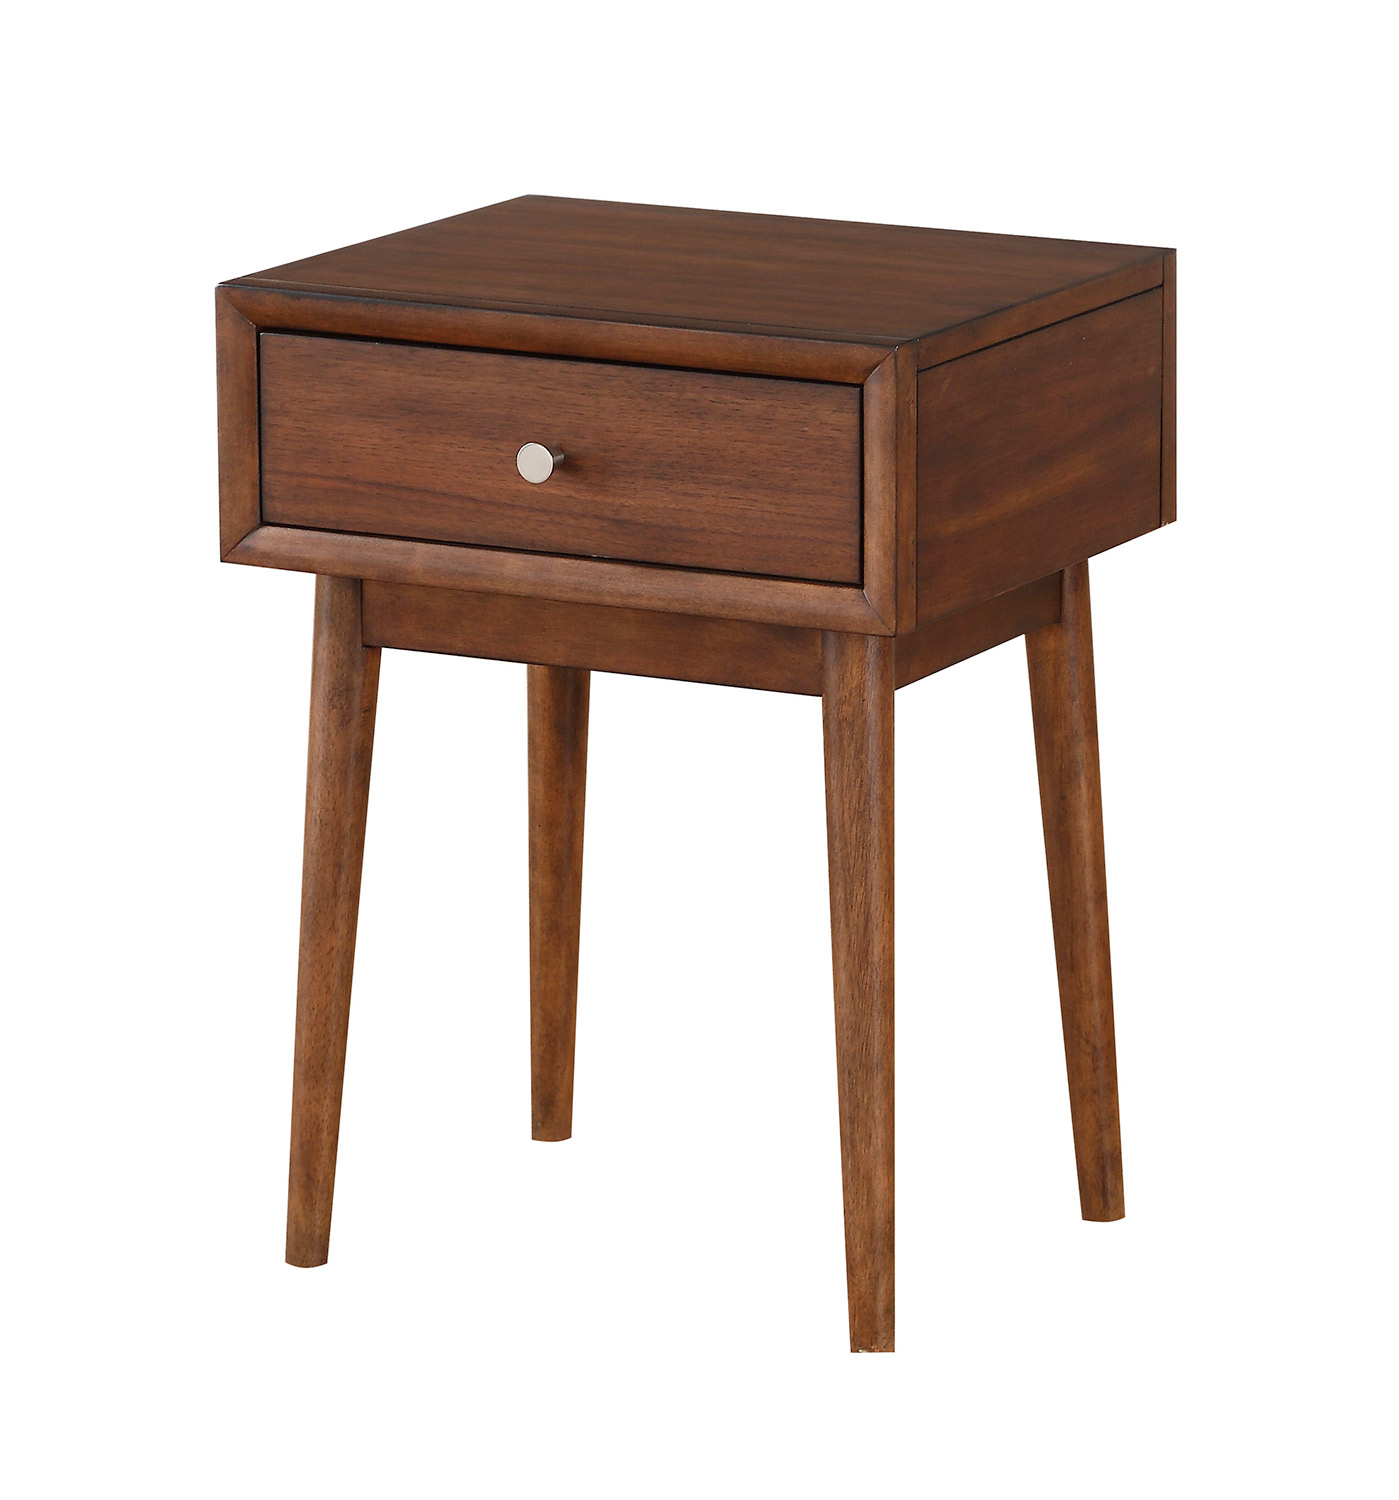 Homelegance Frolic End Table with Functional Drawer - Brown